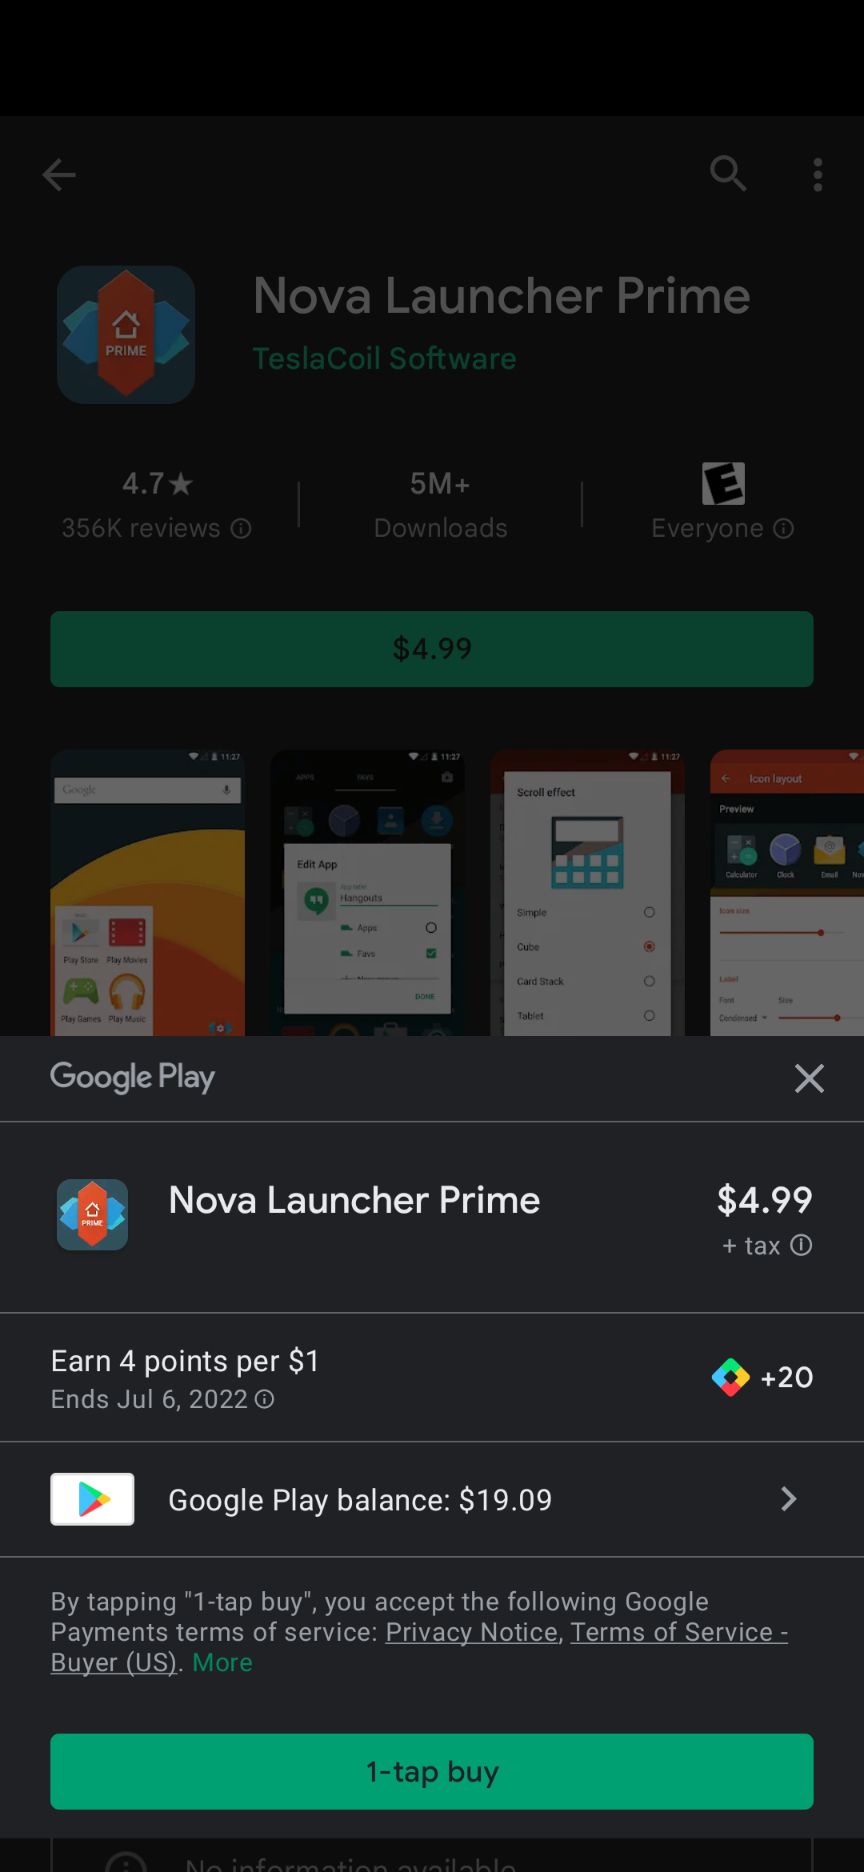 The purchase page for Nova Launcher Prime on the Google Play Store.